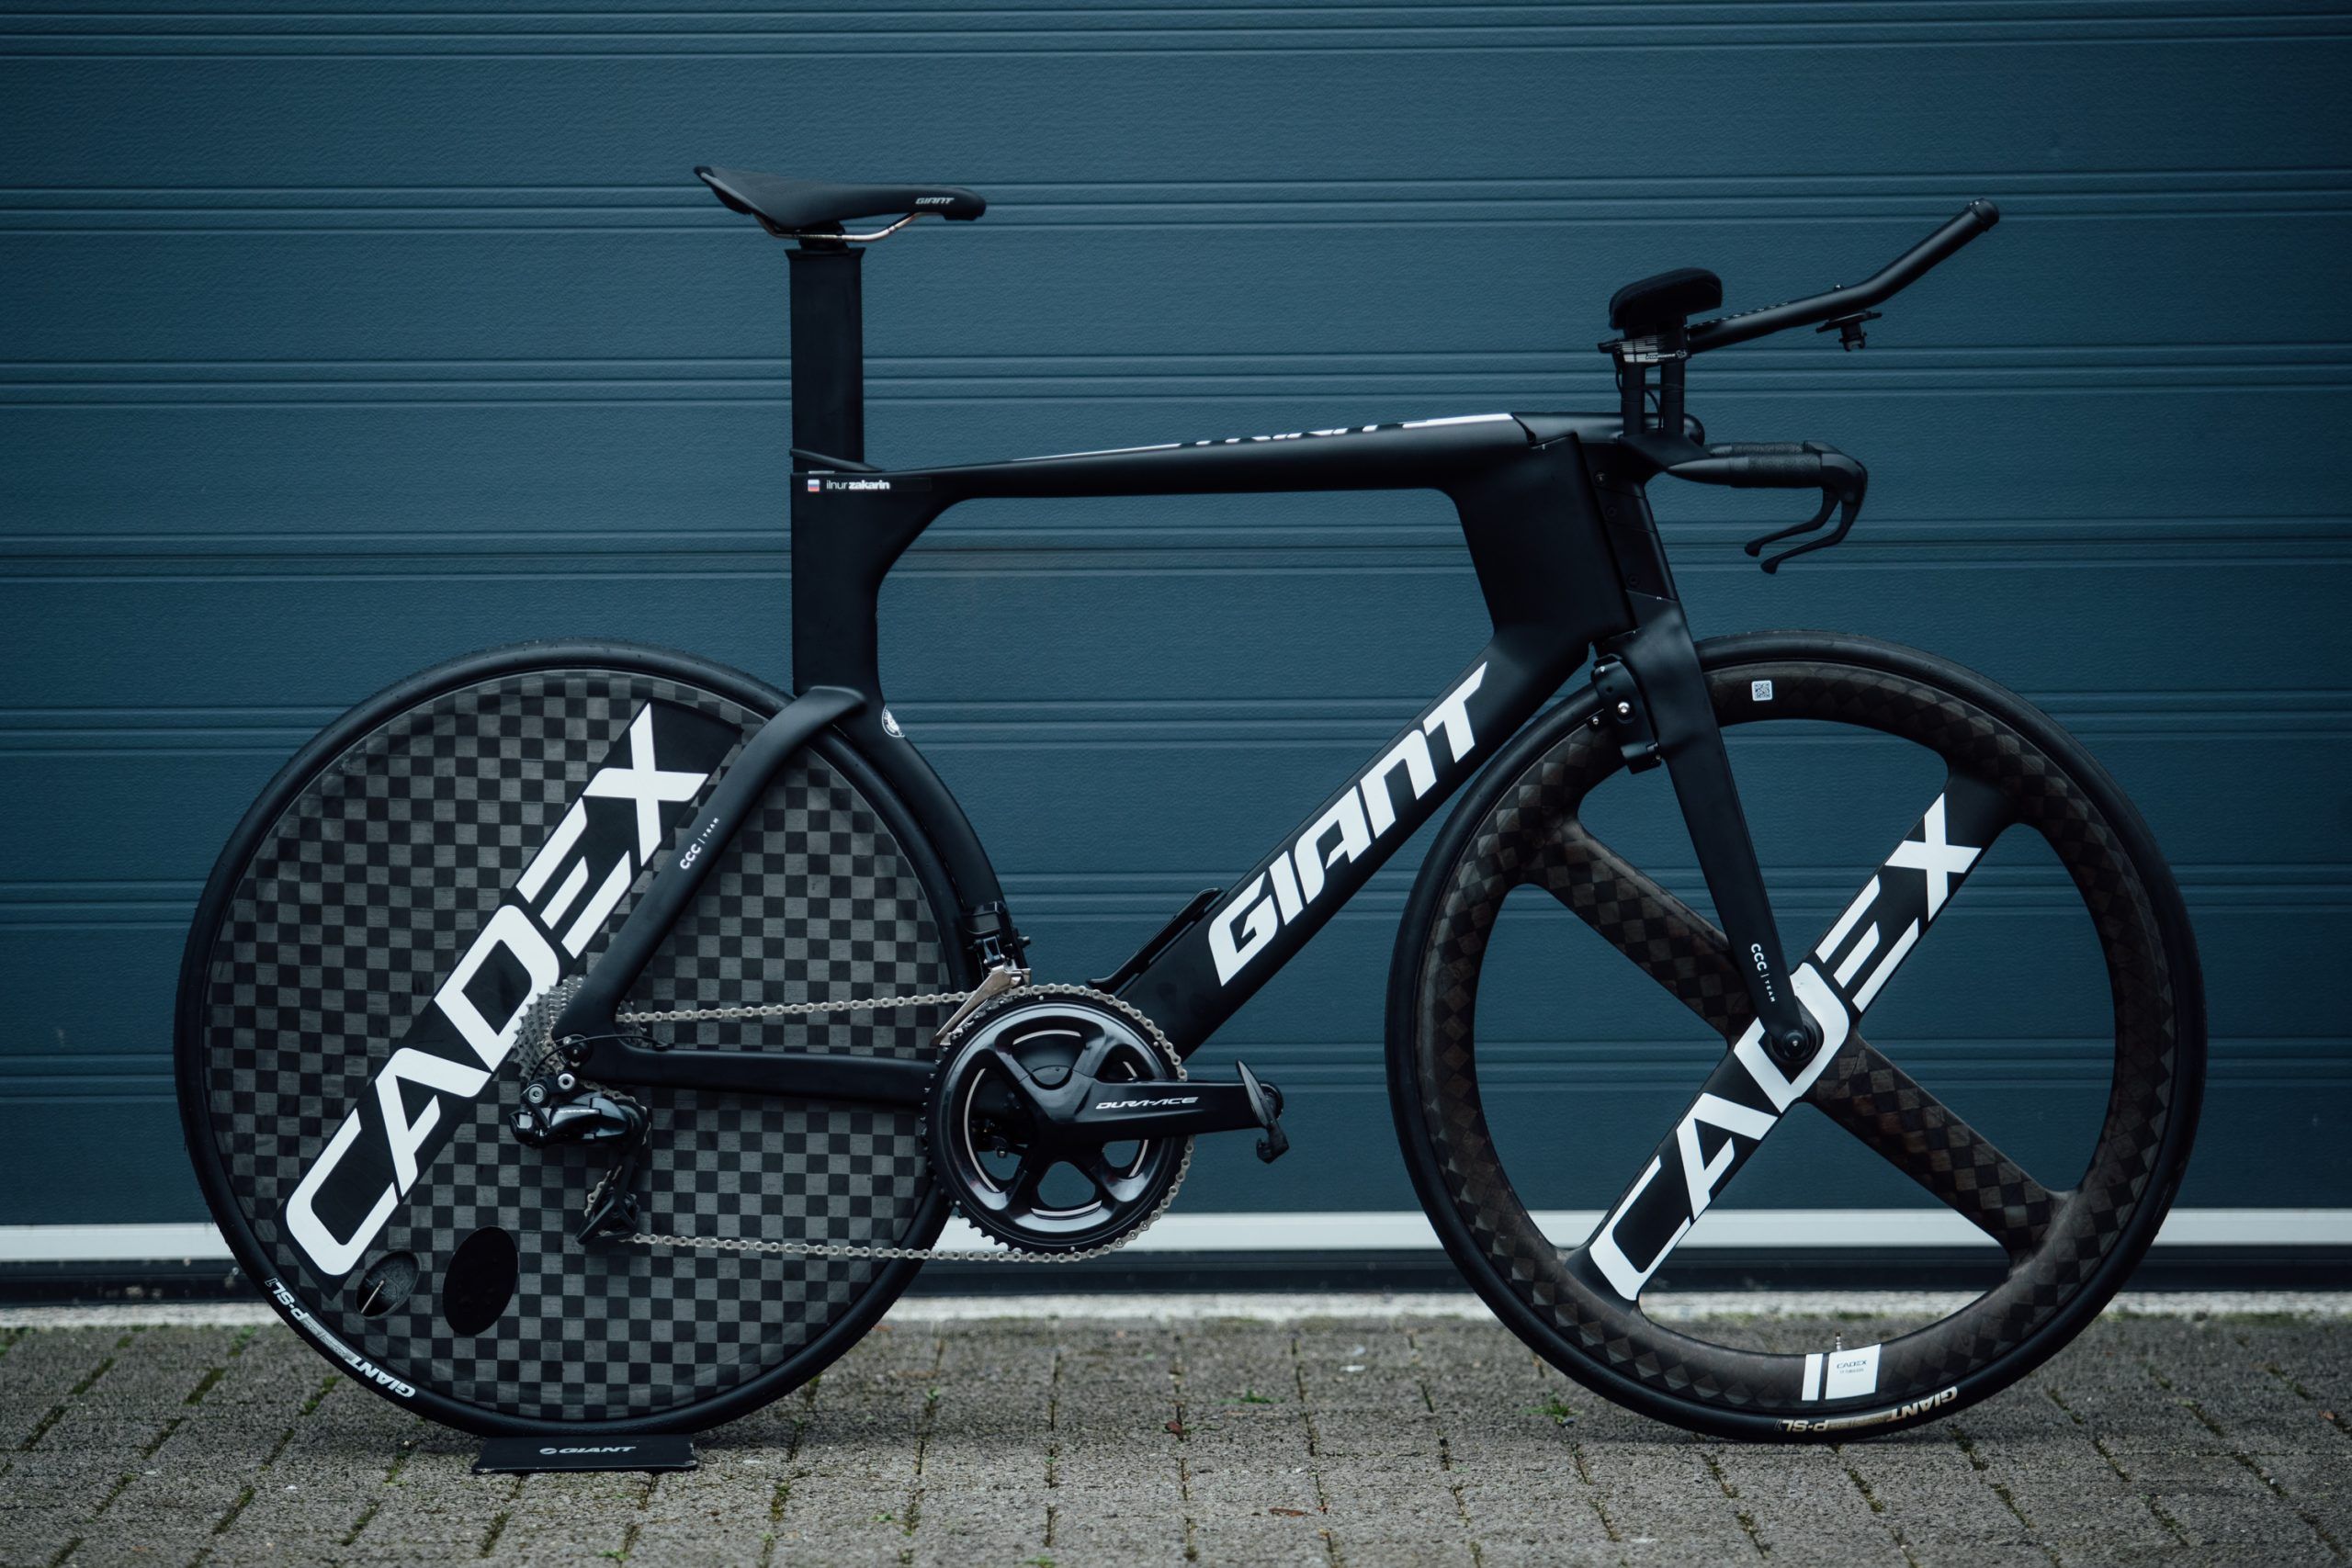 Check out Ilnur Zakarin's stunning Giant time trial bike for 2020